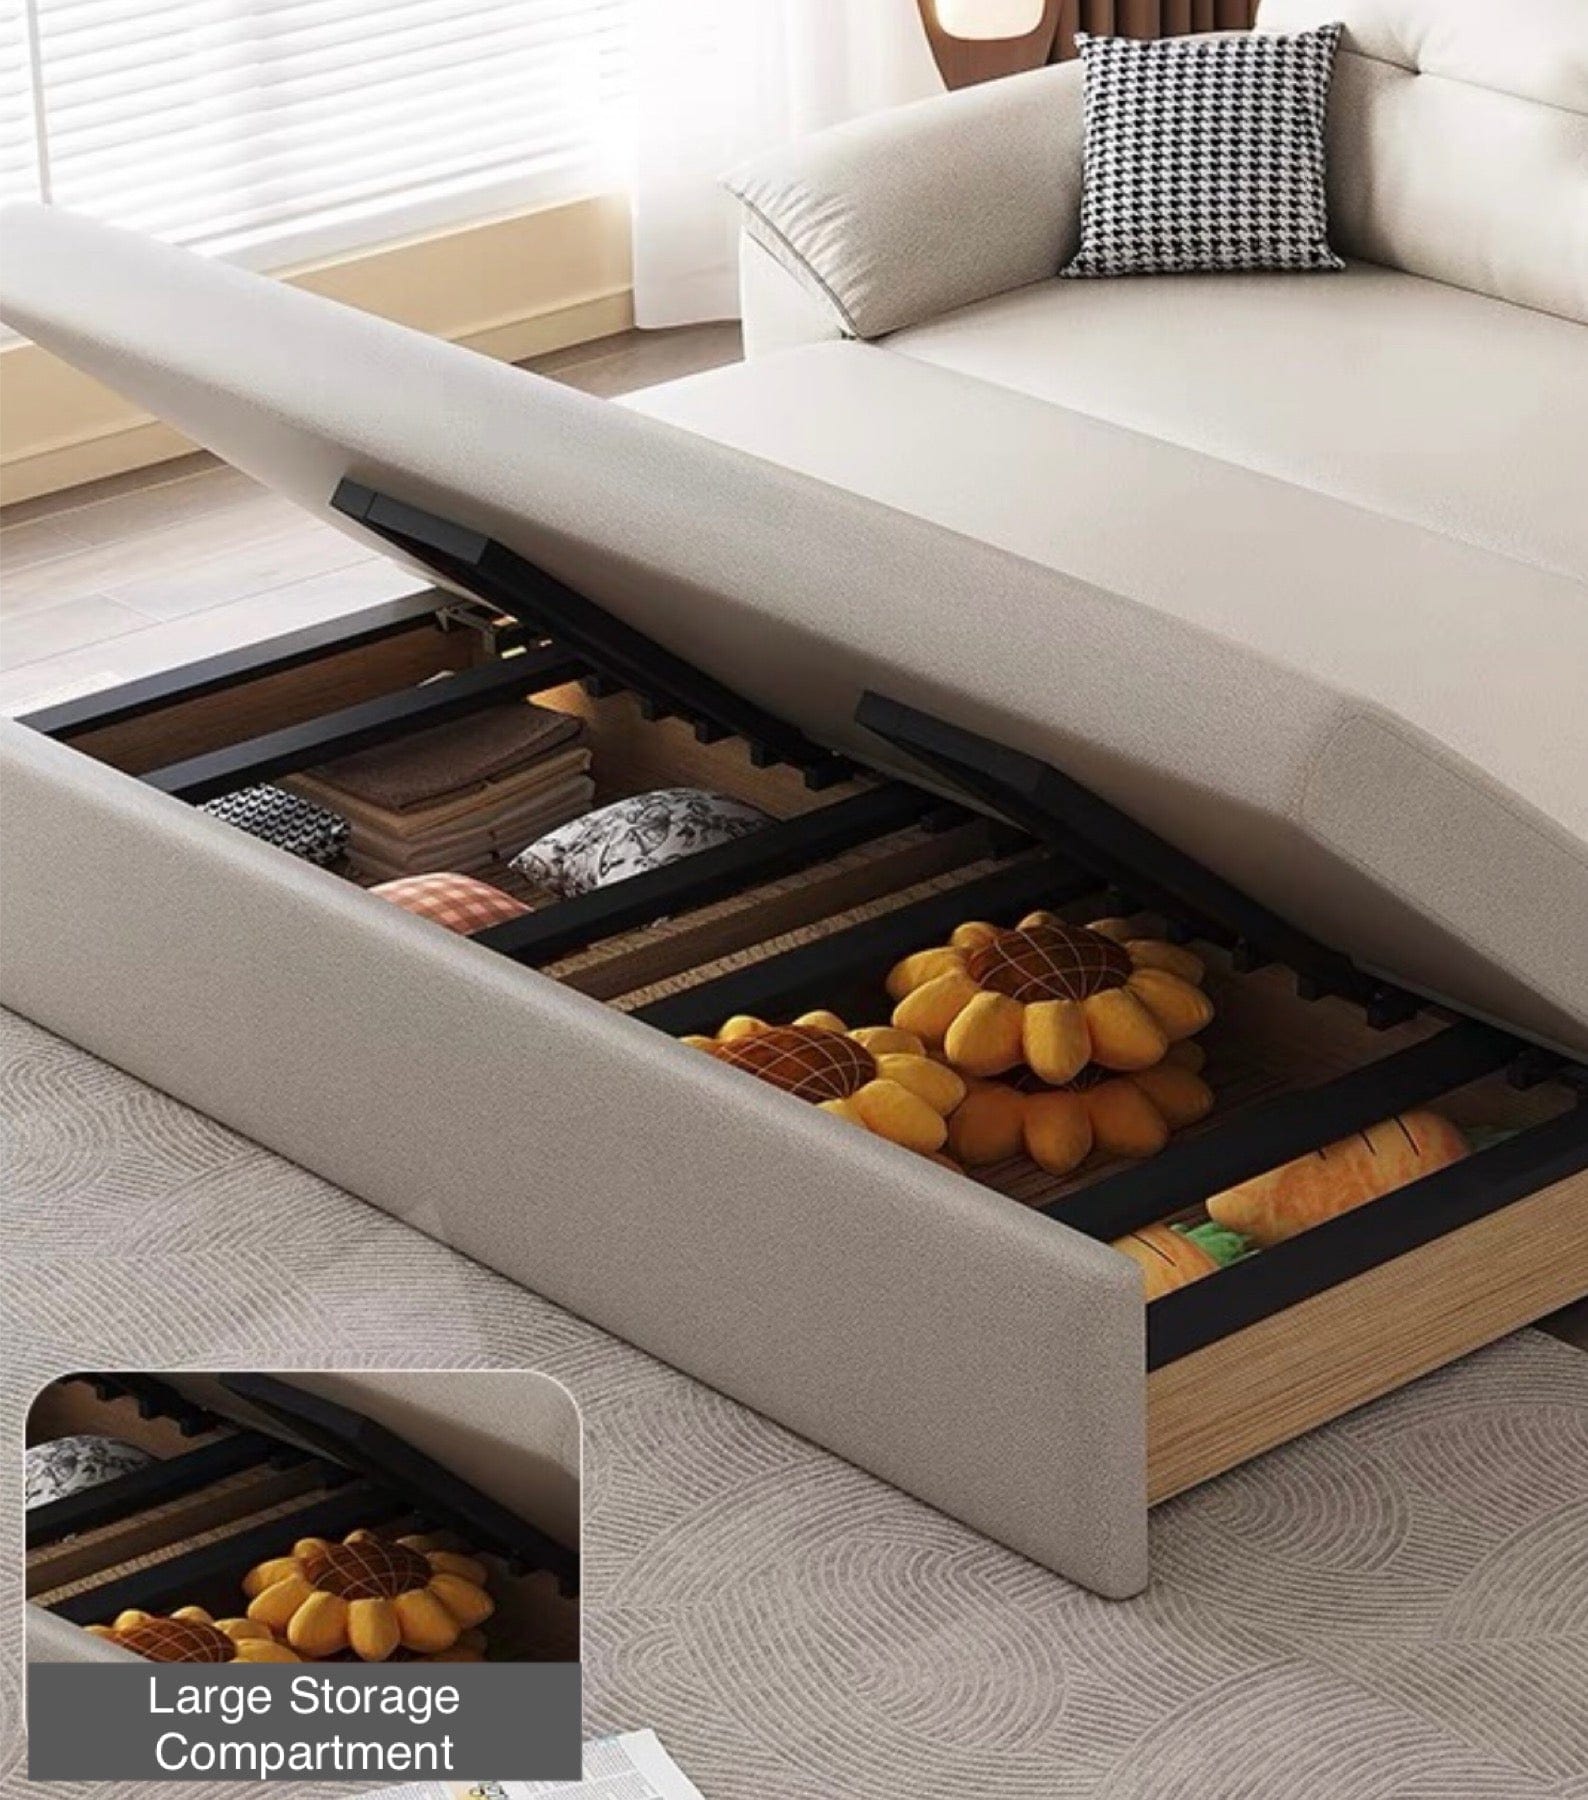 Home Atelier Danny Scratch Resistant Storage Sofa Bed